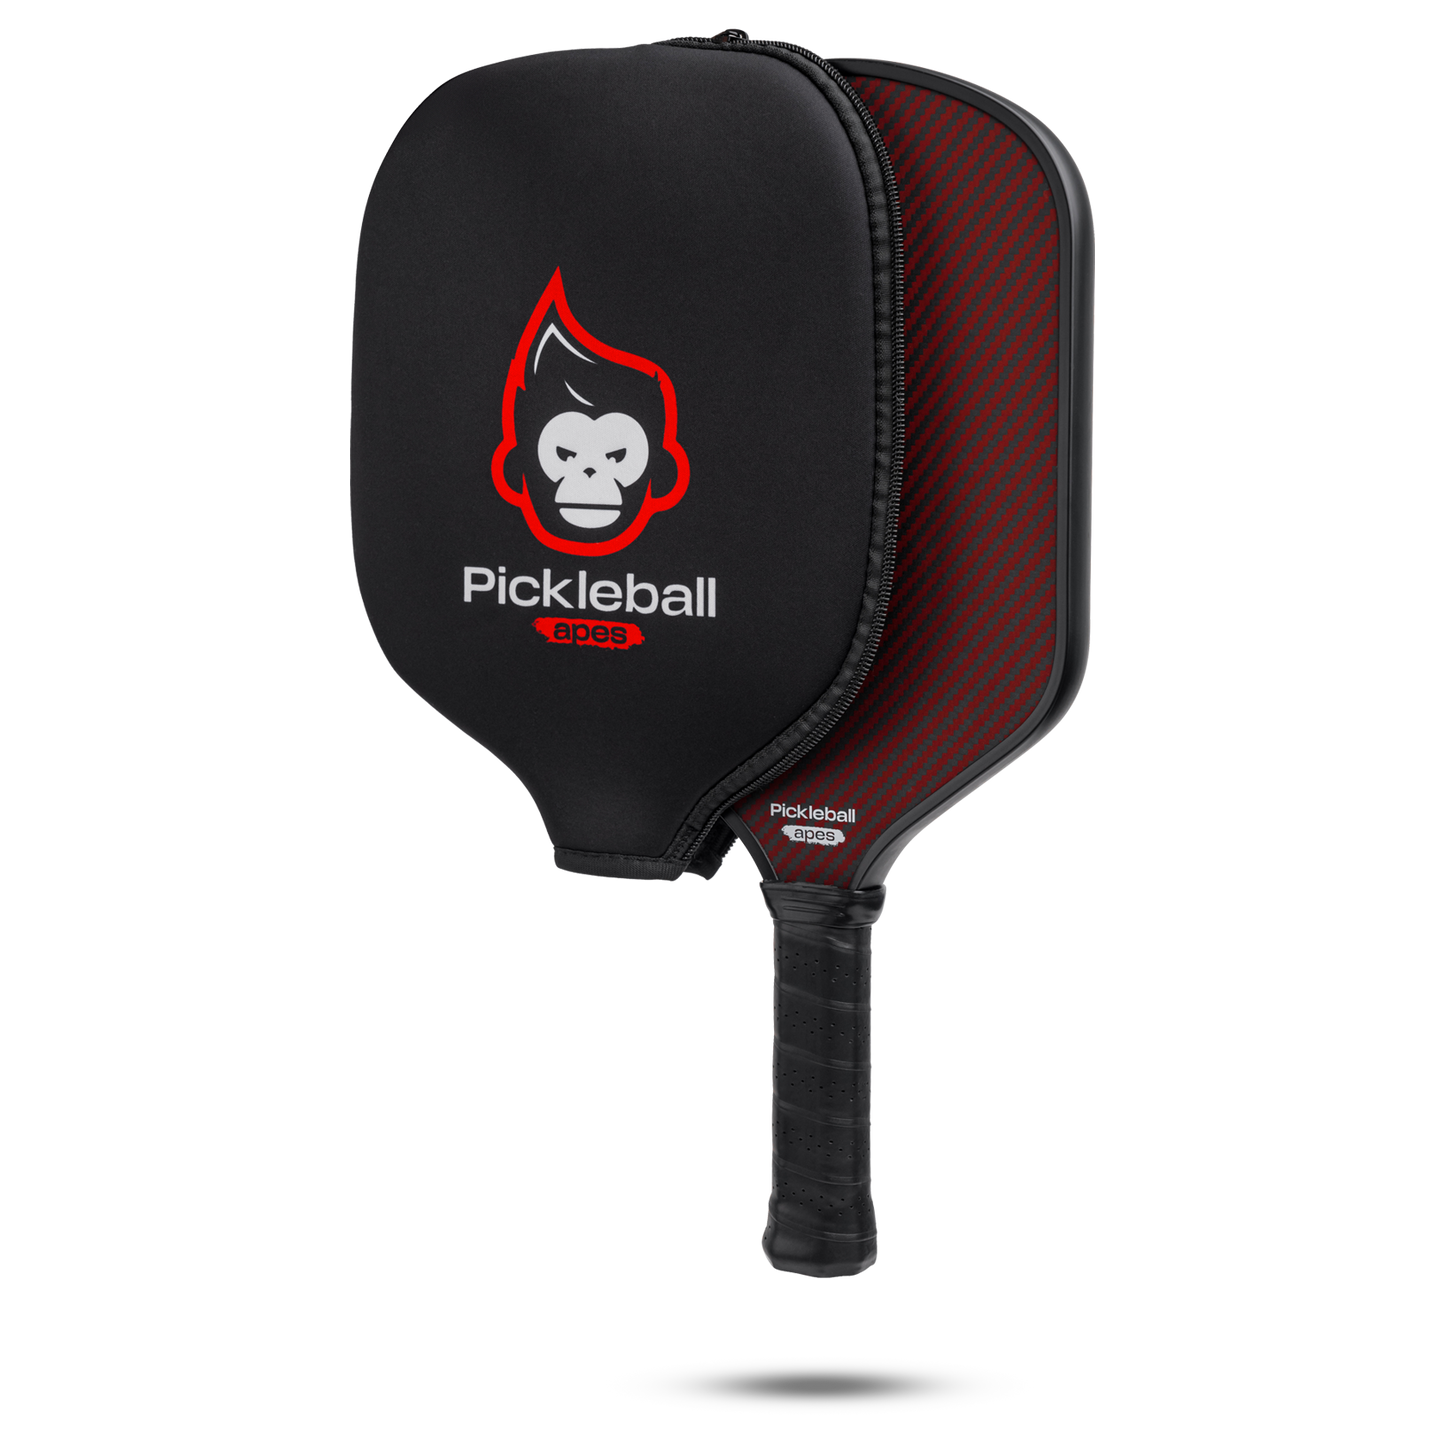 Pro Line Energy S (Includes Paddle Cover)